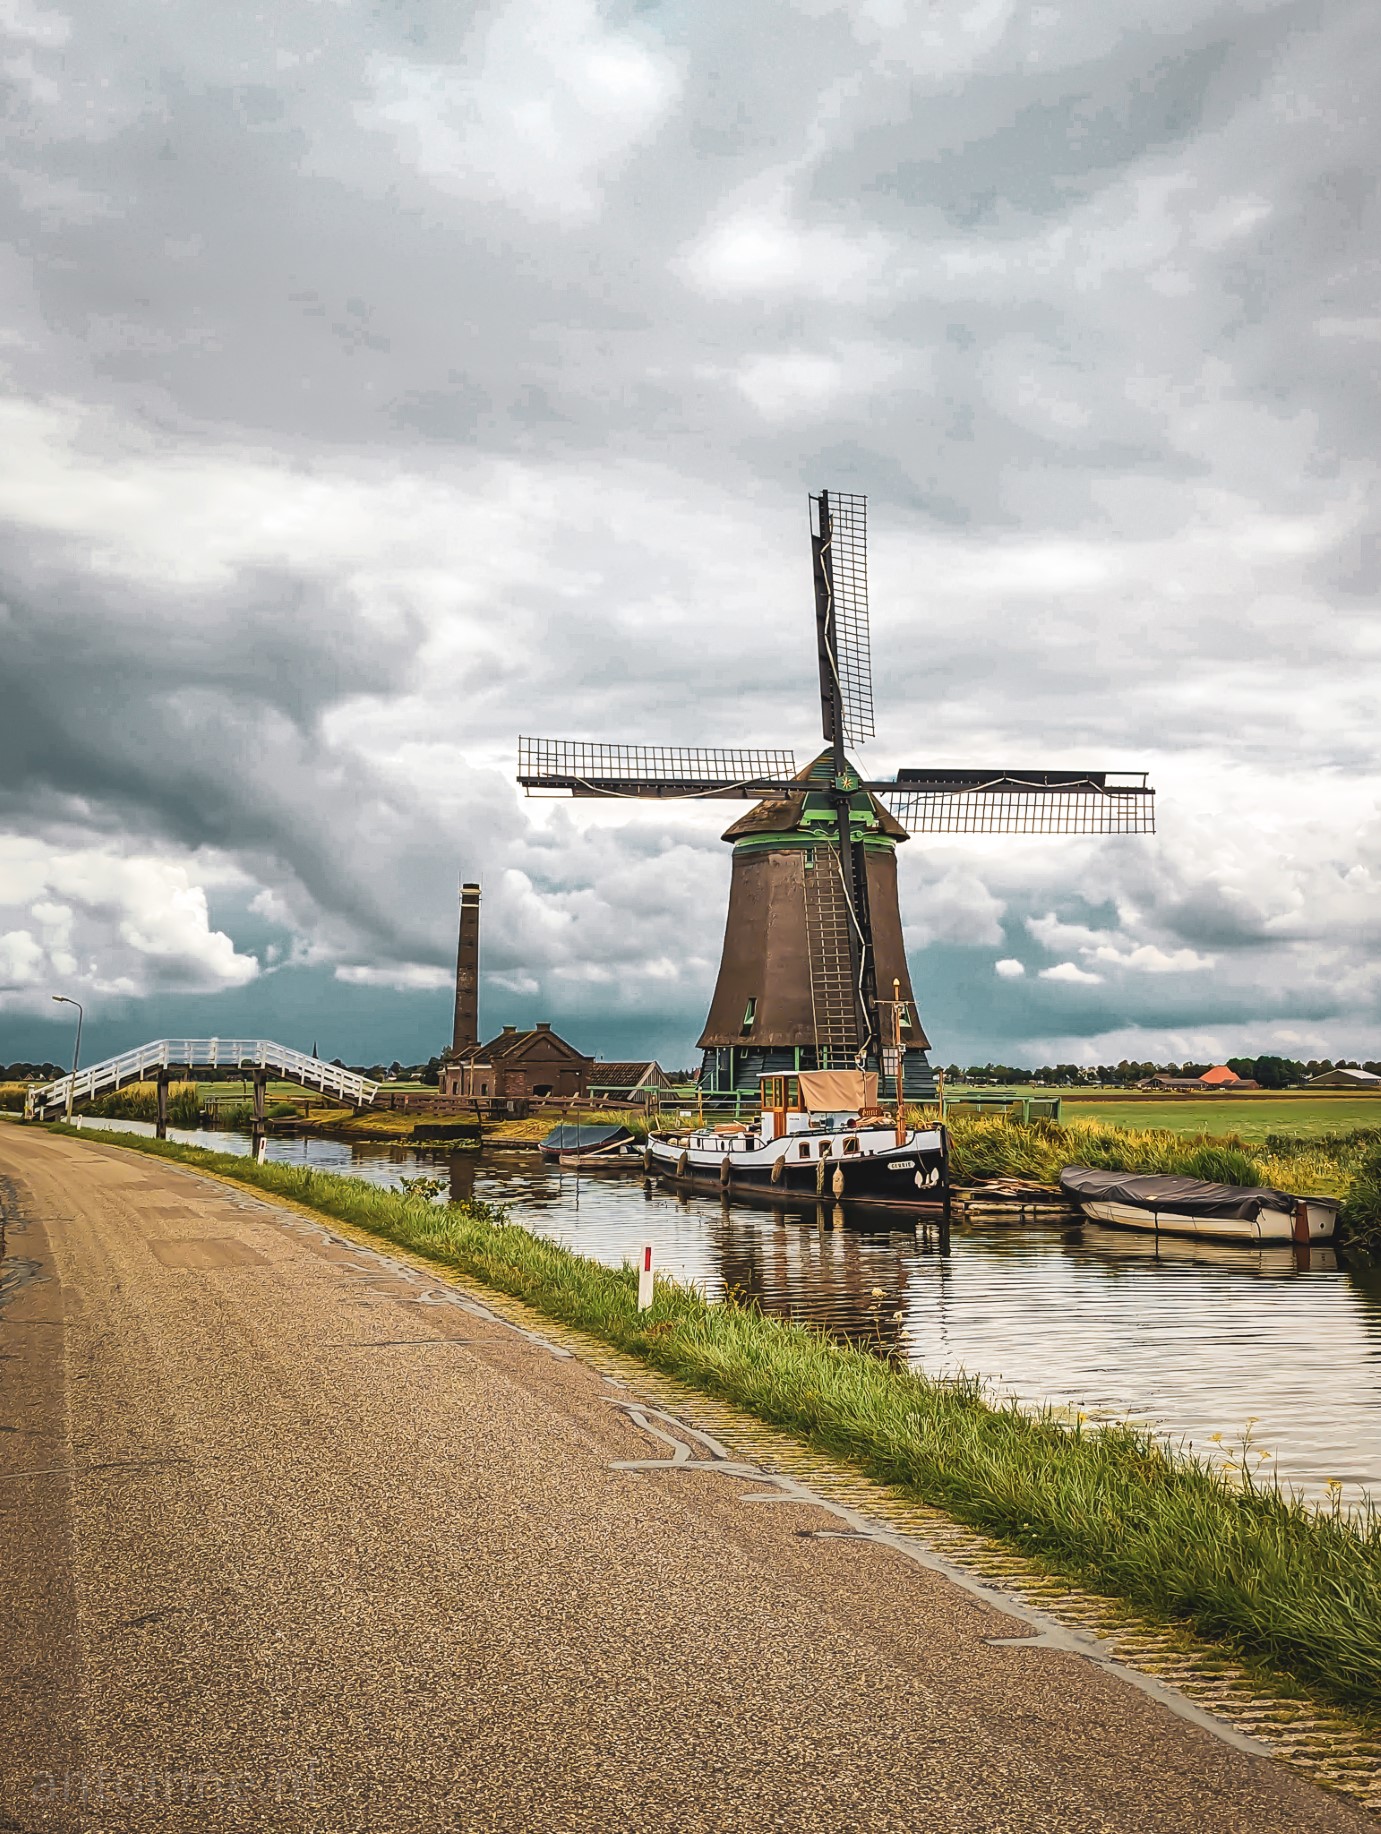 The Kaagmolen is a polder mill built in 1654 for drainage of the Kaagpolder. De mill is located in the outskirts of Spanbroek. In 1879, a steam pumping station was placed next to the mill.